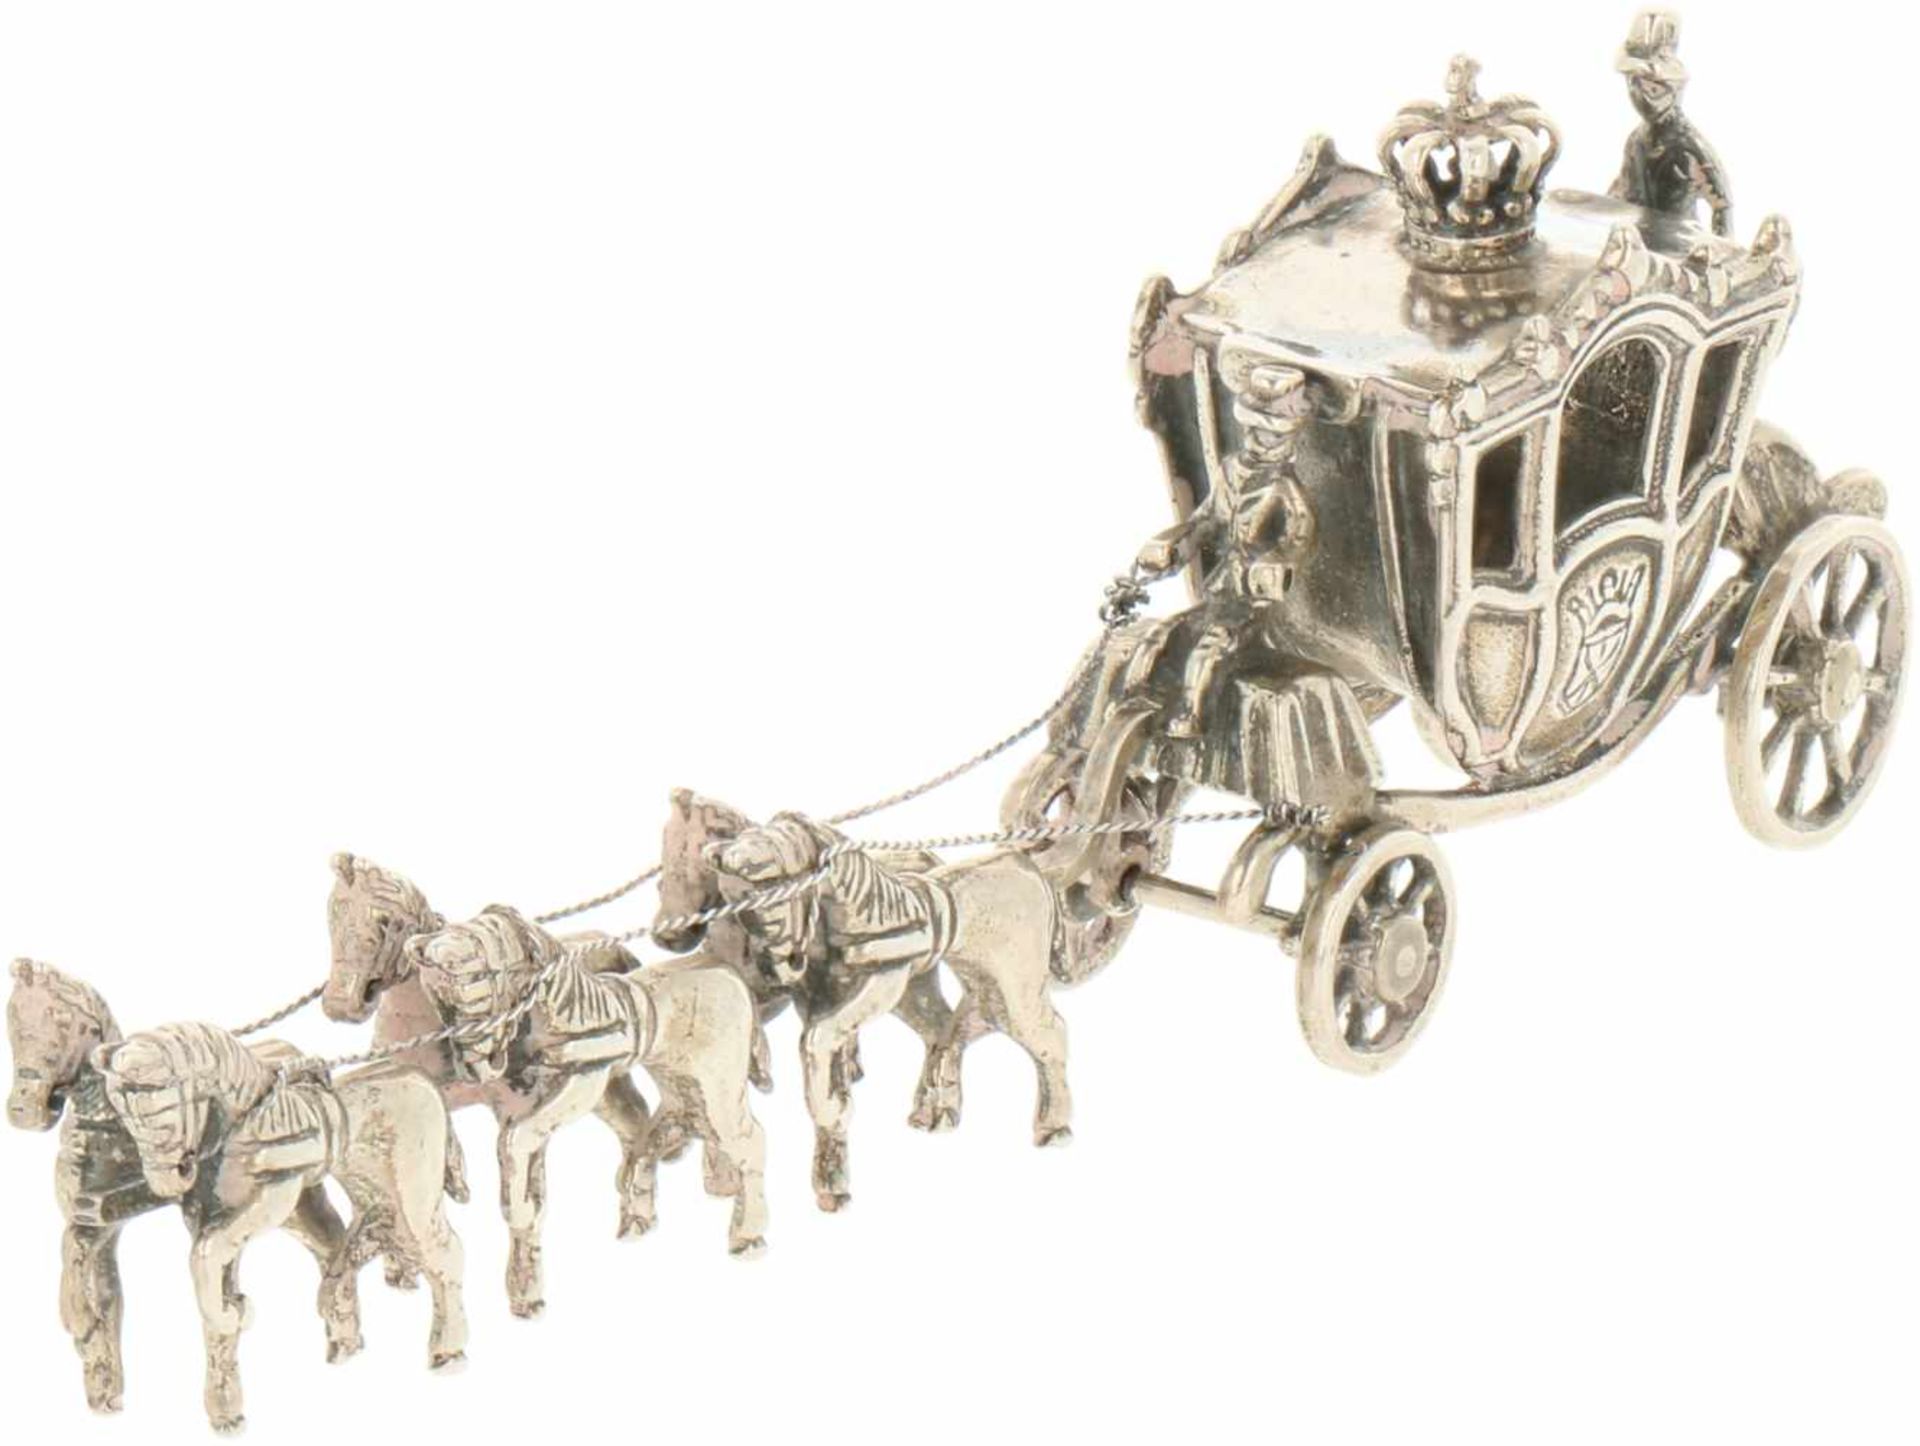 Silver carriage drawn by six horses.